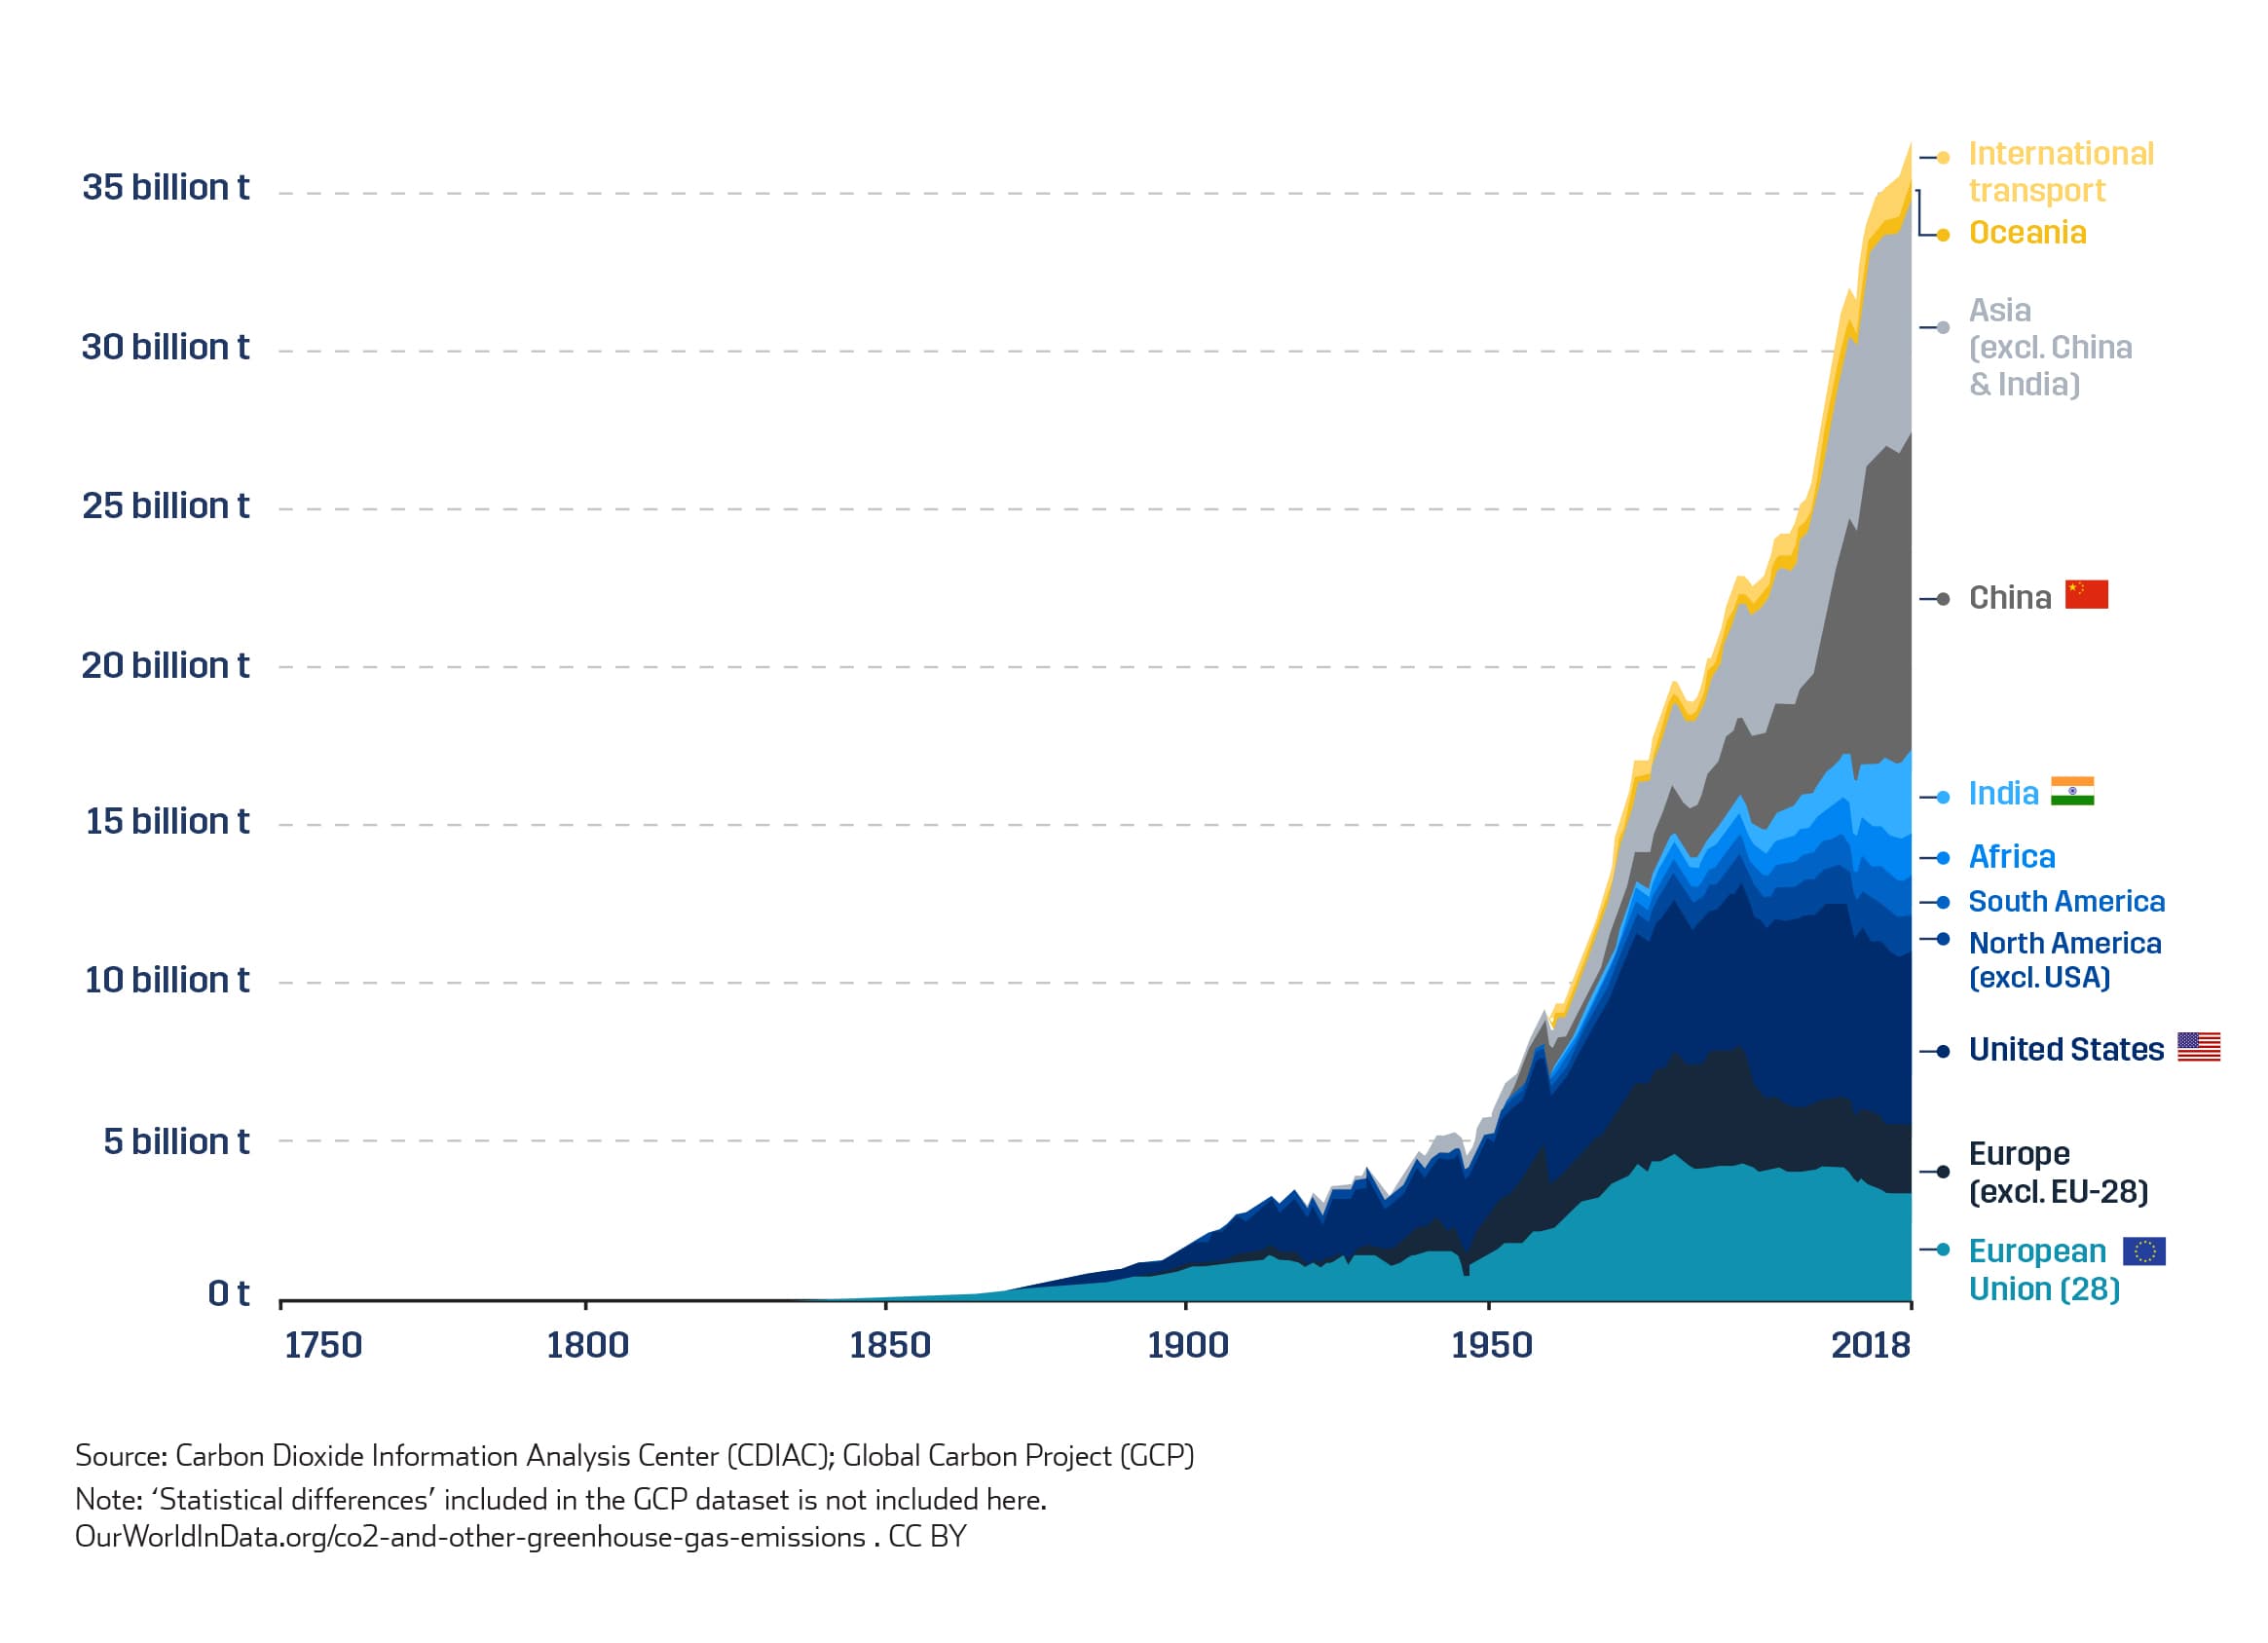 Annual Total CO2 Emissions, by World Region